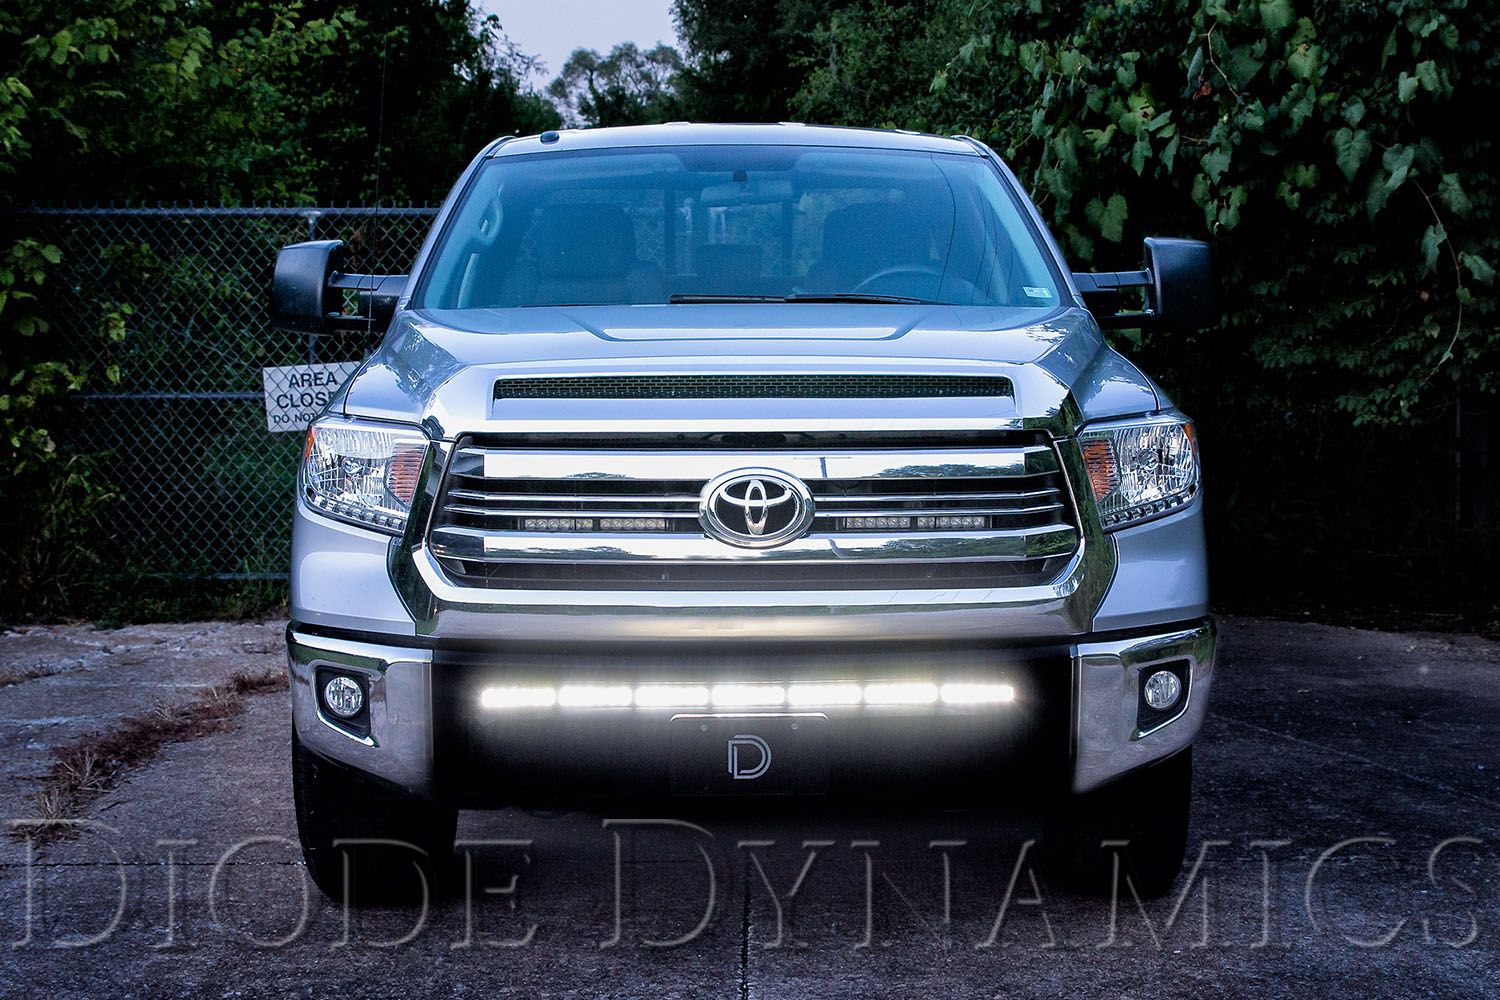 Bolt-on Light Bar Kits for the 2014+ Toyota Tundra now available!